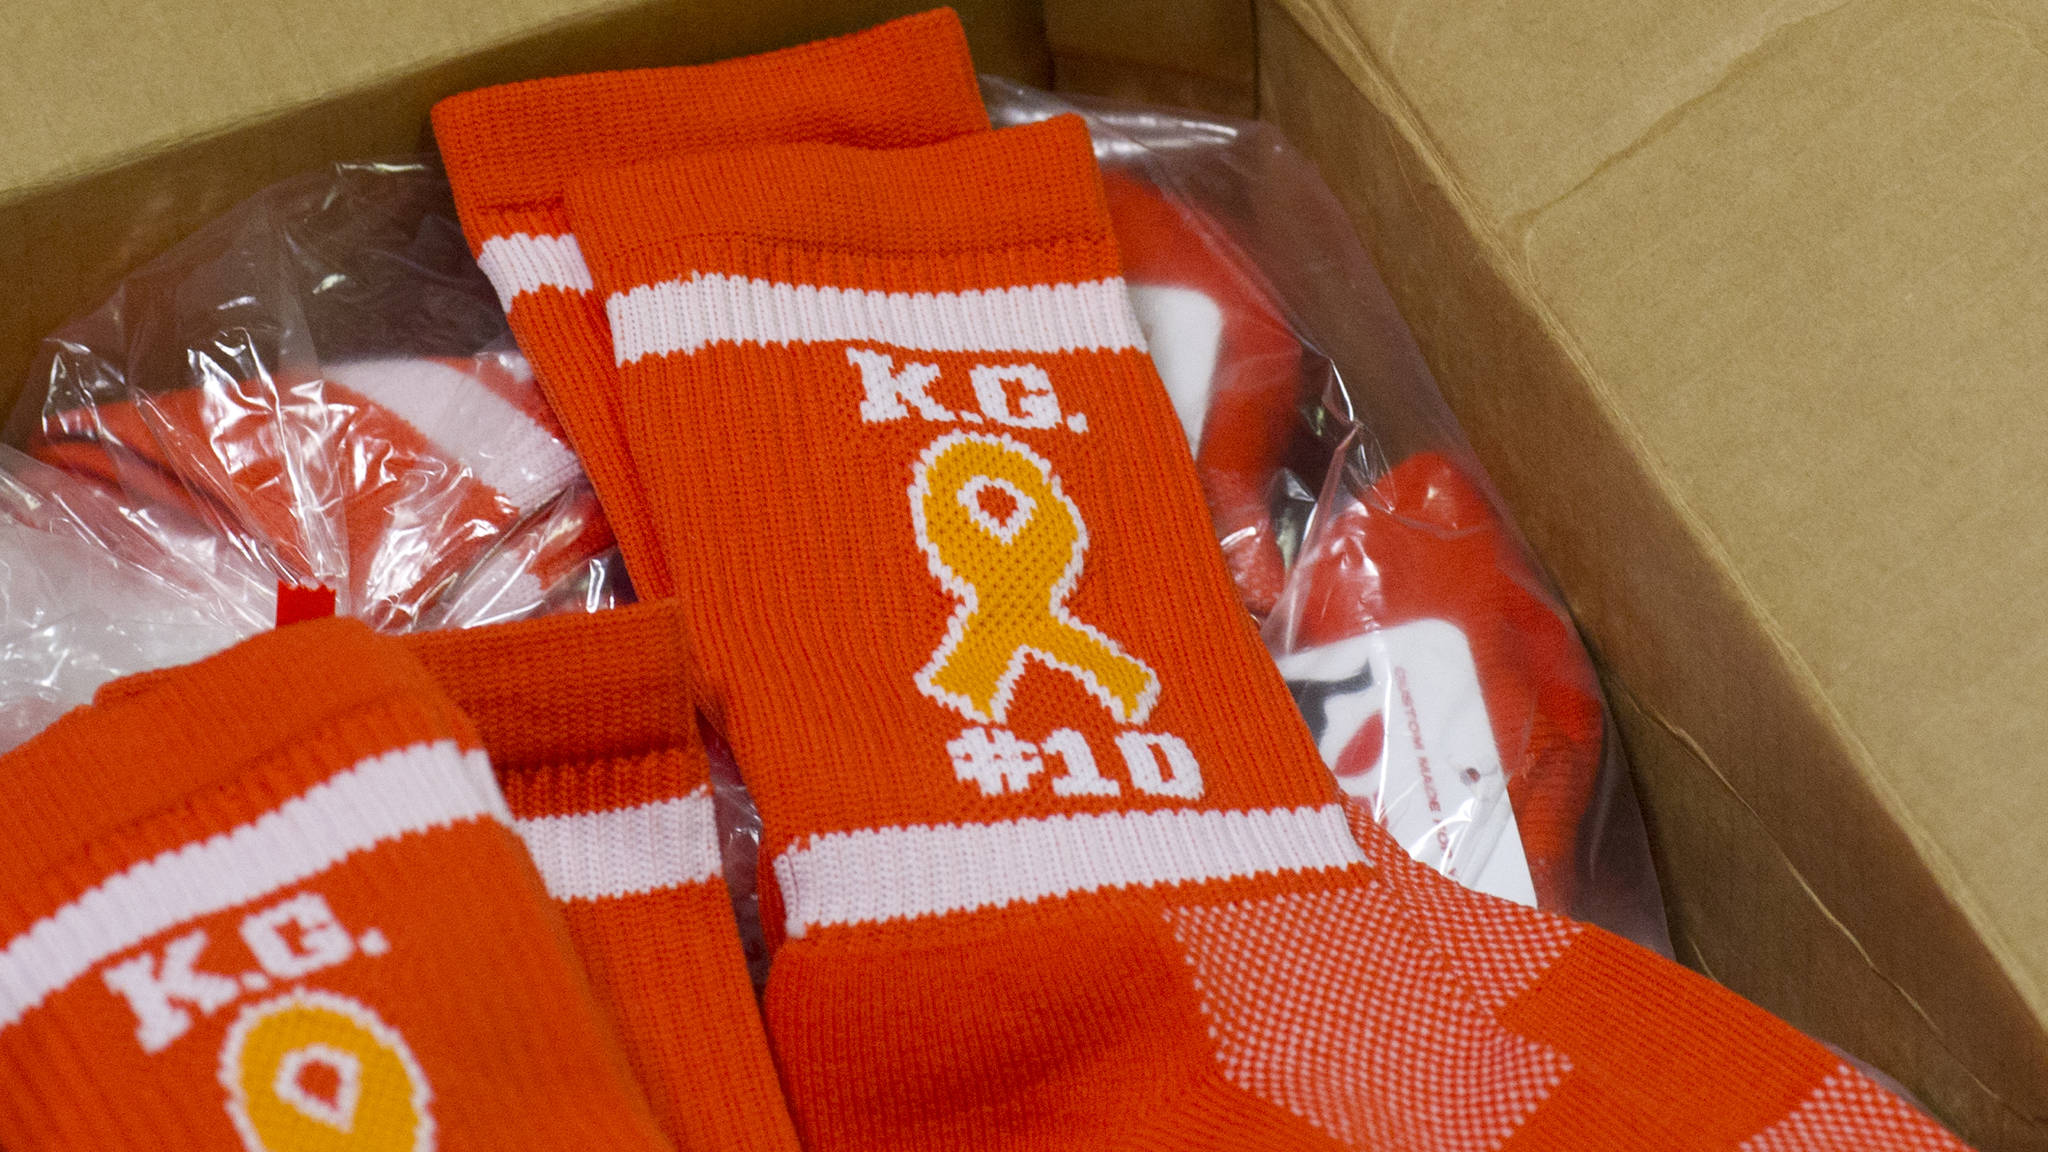 Juneau-Douglas and Thunder Mountain High School players will wear custom-made orange socks in remembrance of Kevin Guimmayen for Saturday’s game at JDHS. (Nolin Ainsworth | Juneau Empire)